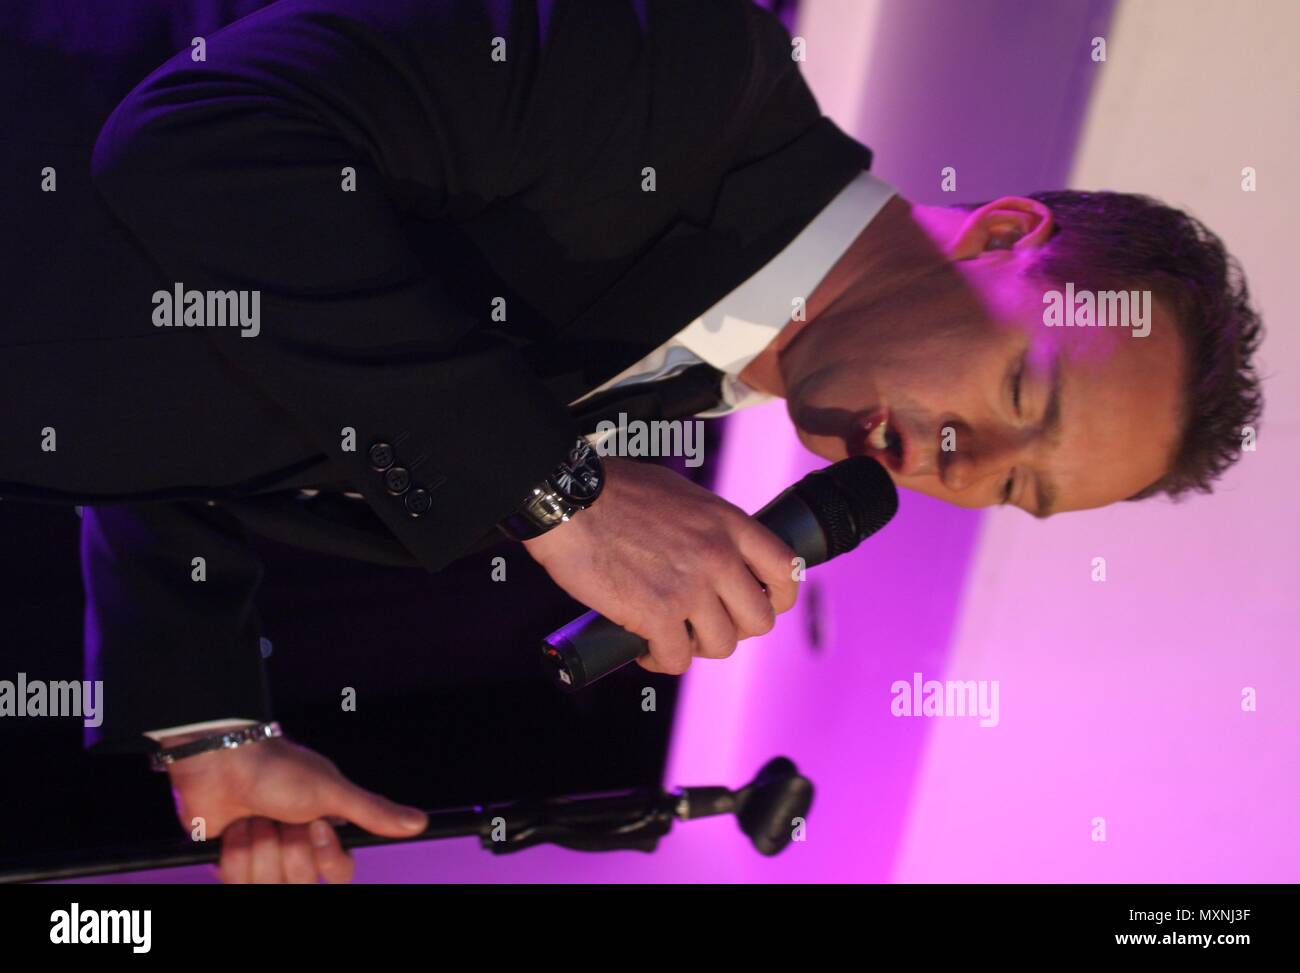 Manchester,uk, Opera singer russel watson performs at Trafford Centre credit Ian Fairbrother/Alamy Stock Photos Stock Photo